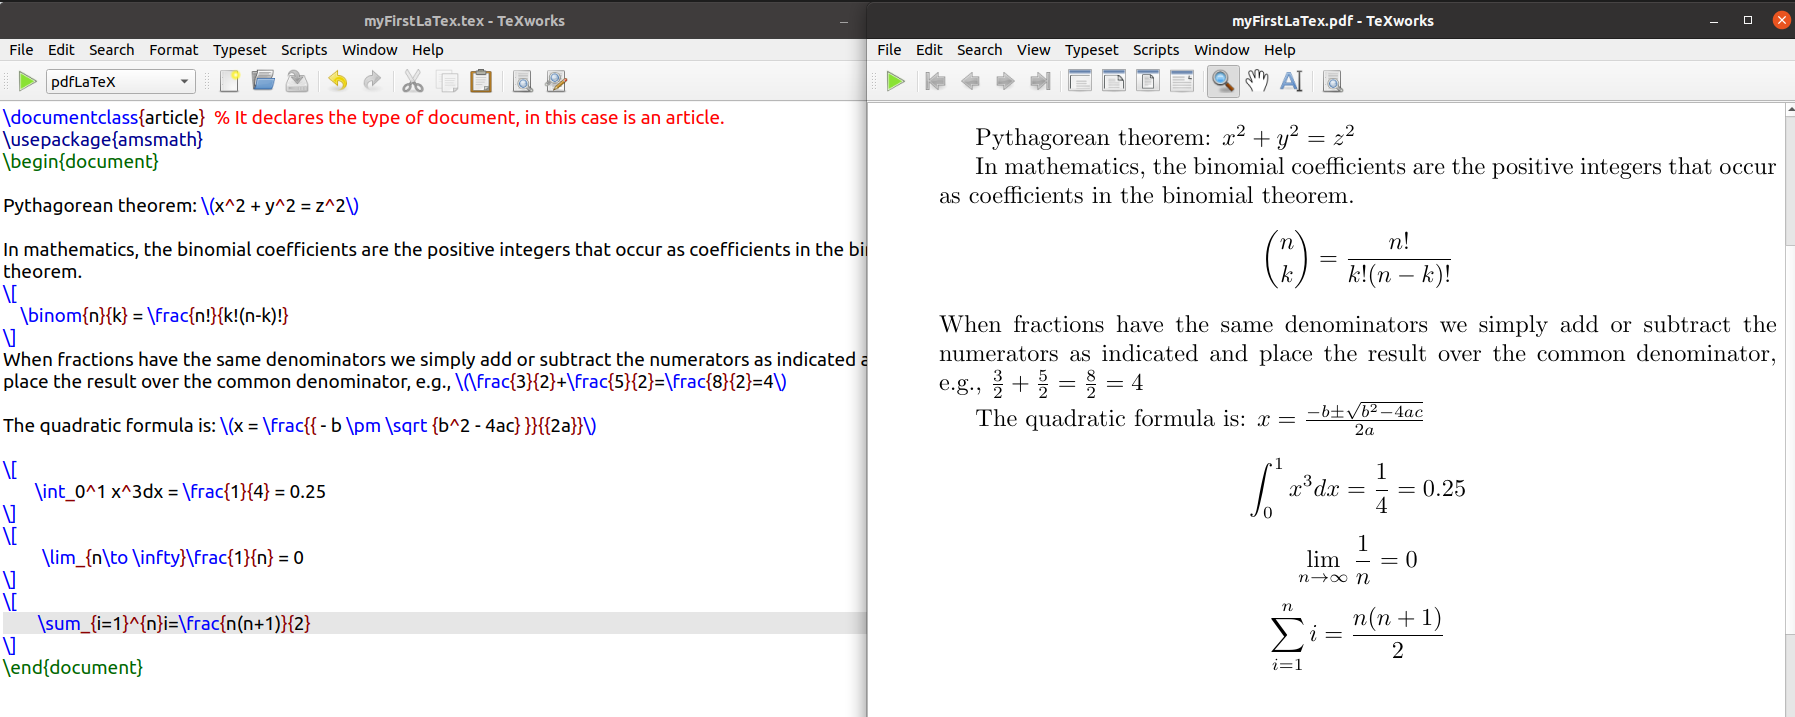 TeXworks is a free open-source LaTeX editor